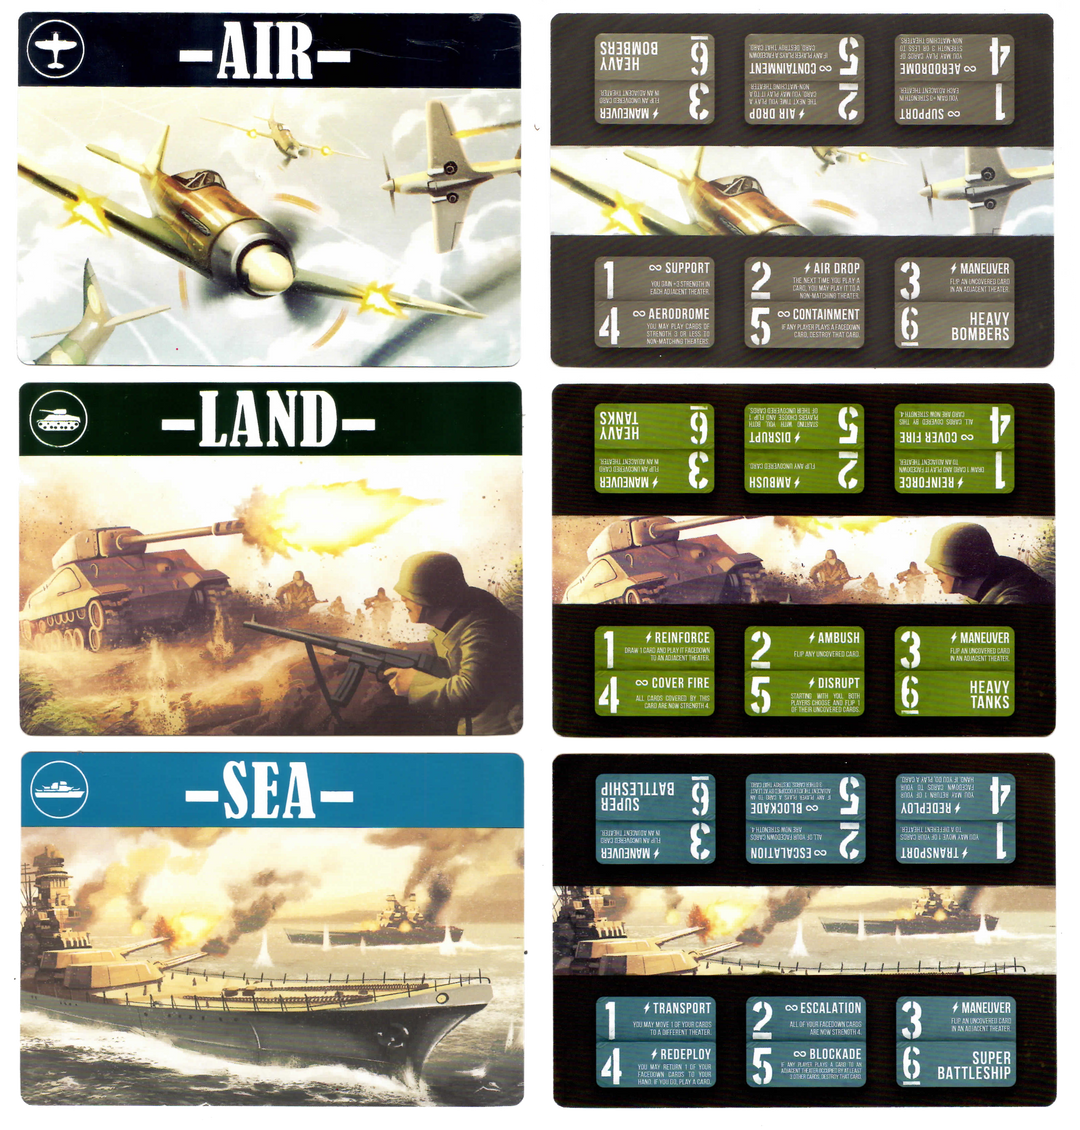 A compilation image of the three foil cards in this promo for the board game Air, Land, & Sea, depicting an airplane on the "Air" card, a tank on the "Land" card, and a battleship on the "Sea" card, next to the image of the three card backs with descriptions of the cards' effects in the game.